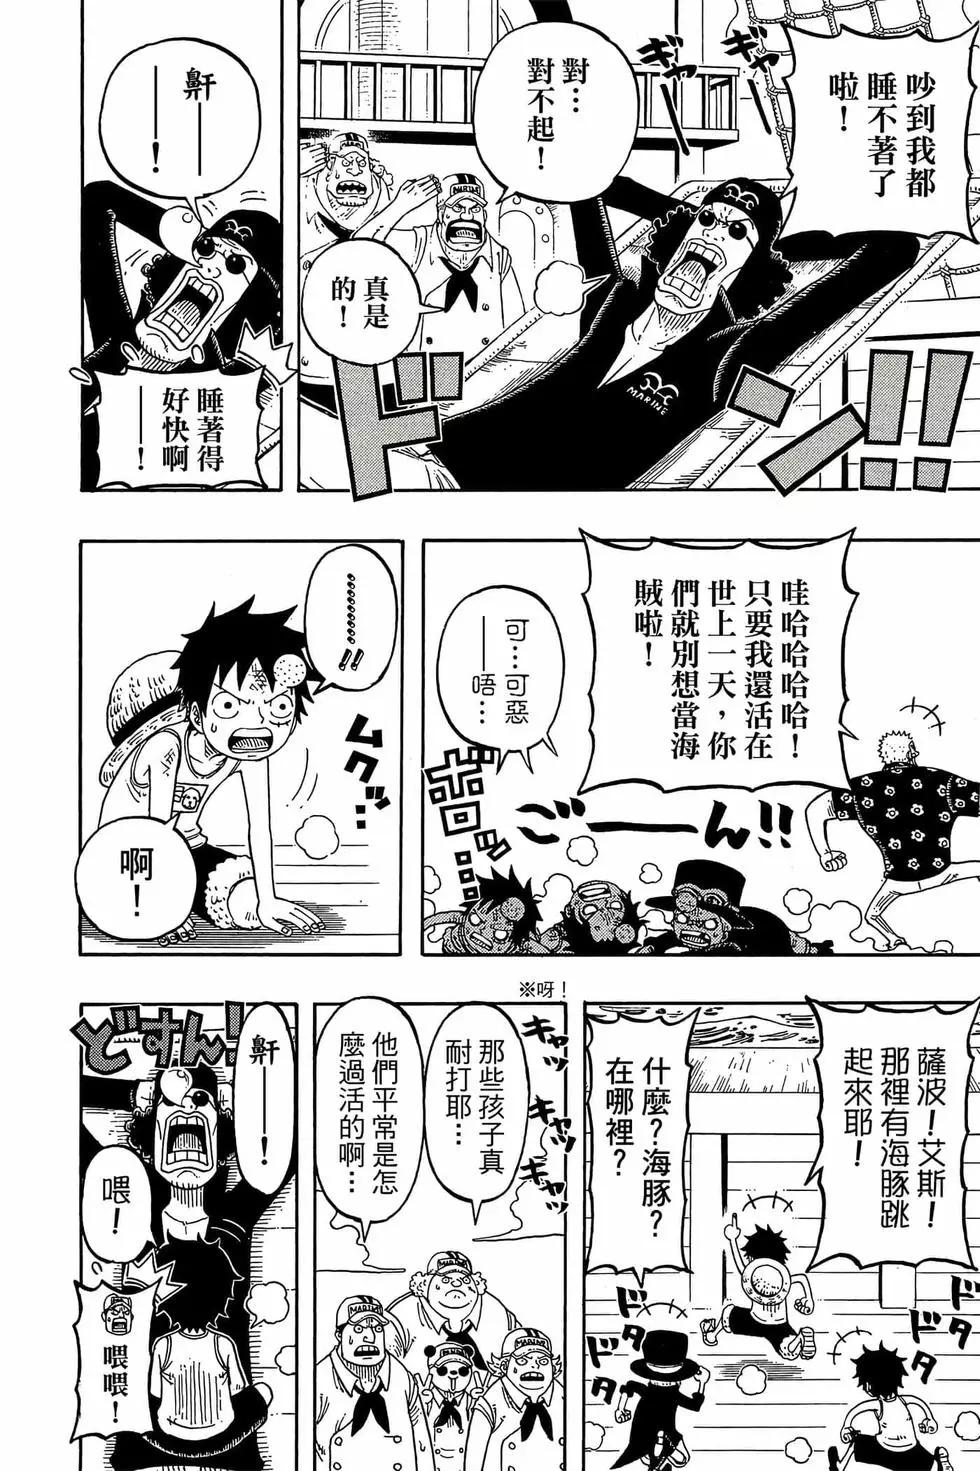 One piece party - 第03卷(1/4) - 7